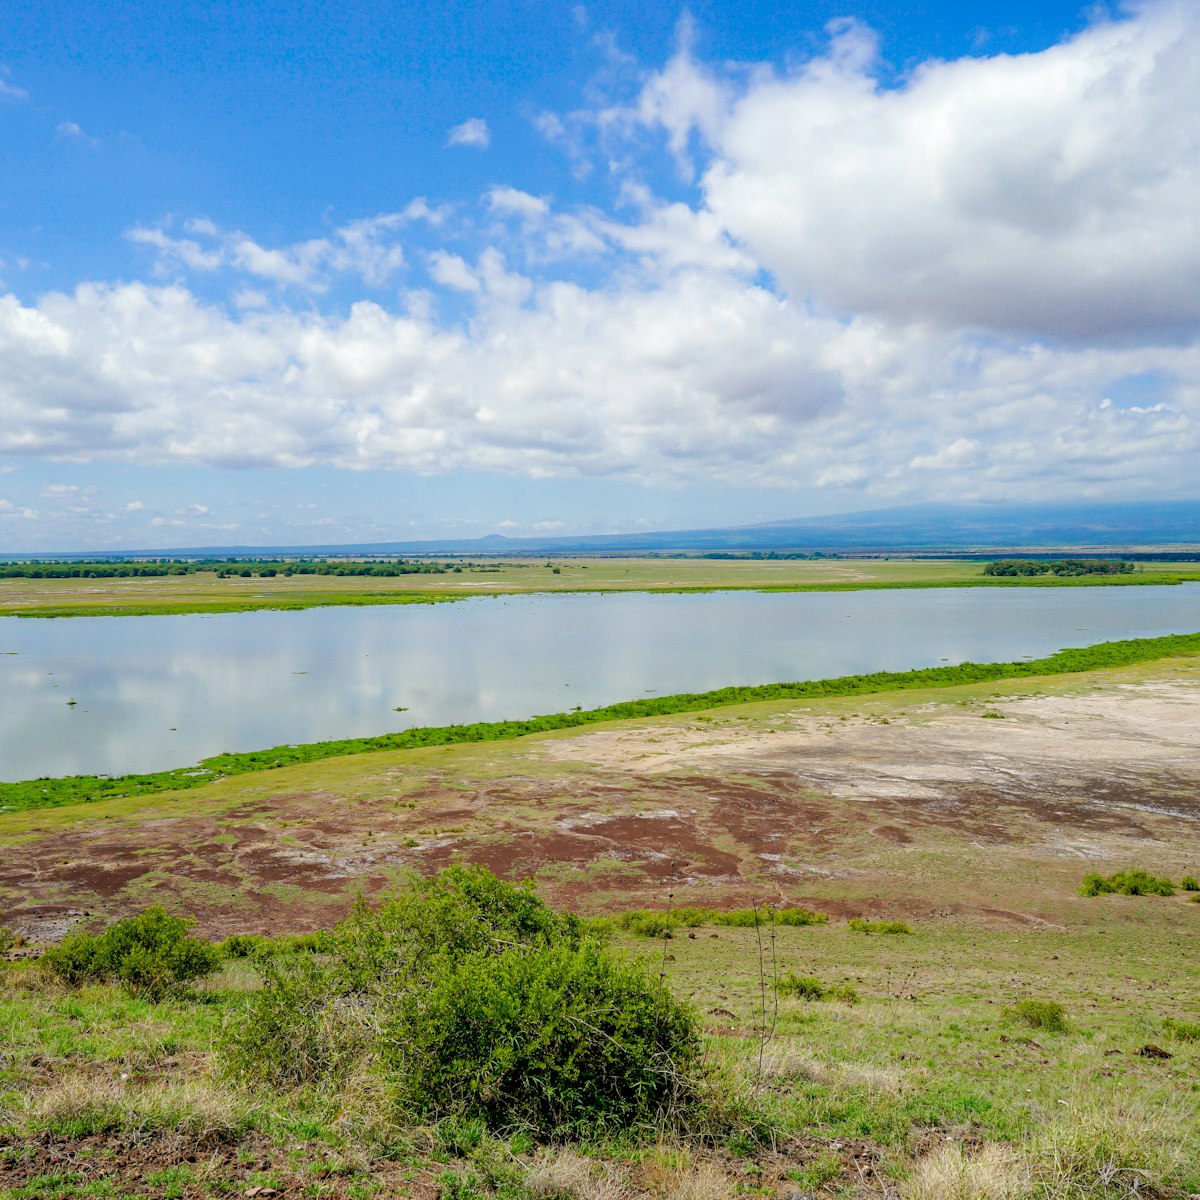 View of Amboseli National Park from Observation Hill.